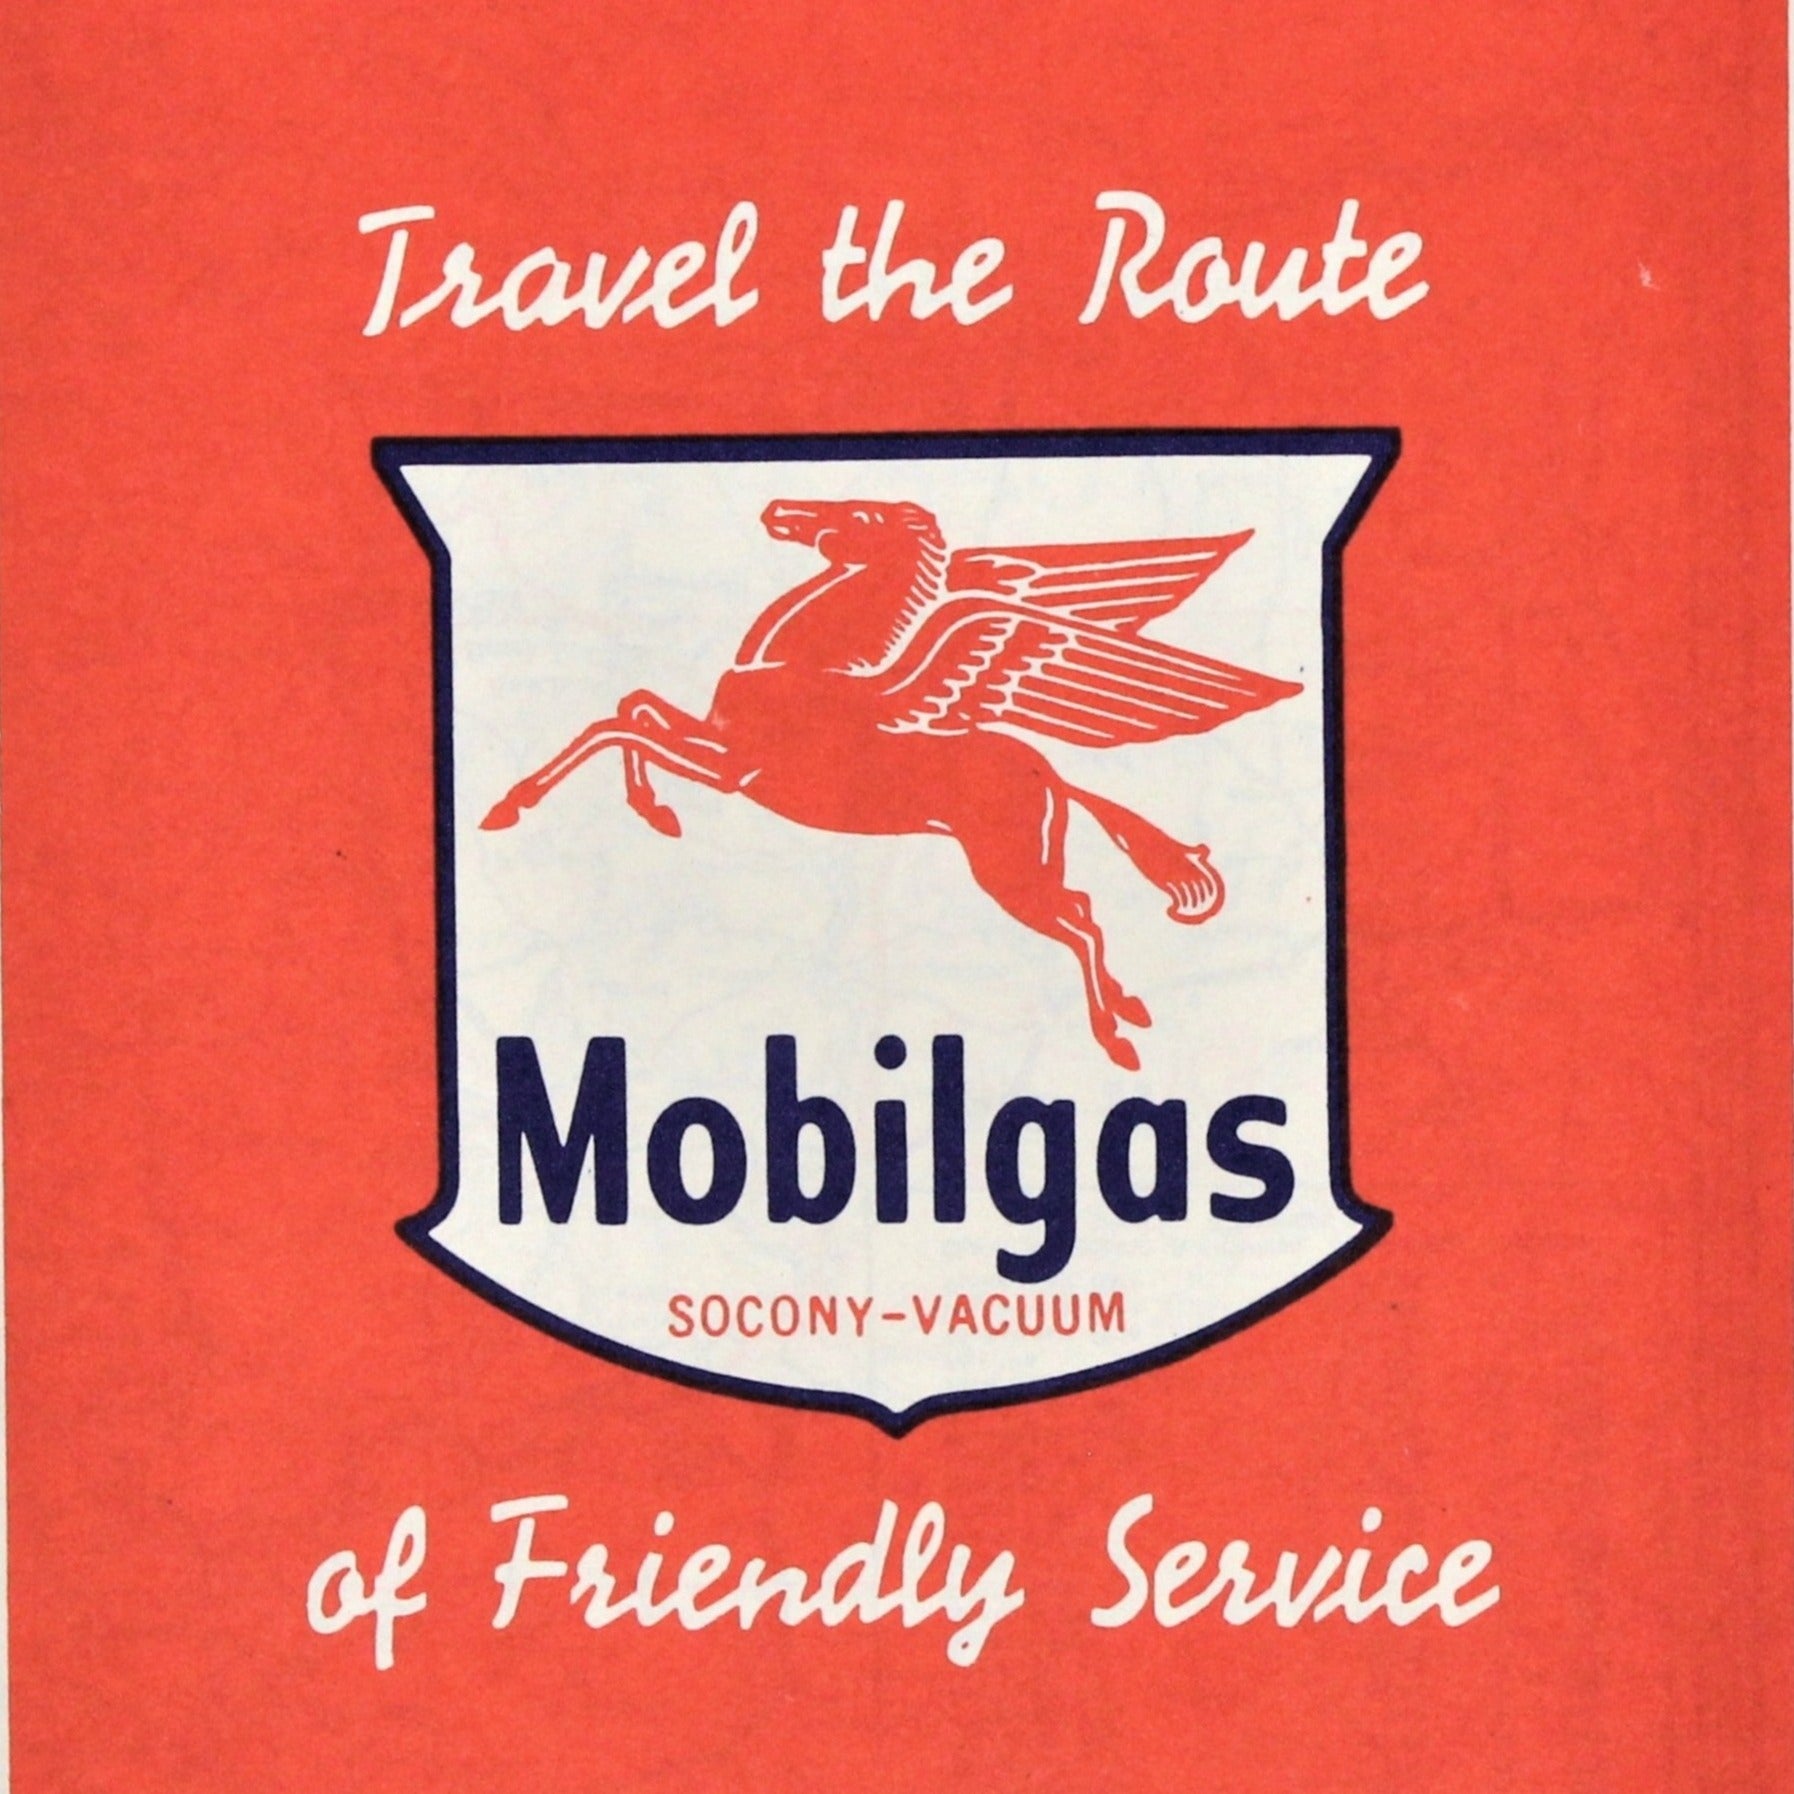 Vintage Mobil pegasus (flying horse) gas station insigia along a road in  East Texas | Library of Congress